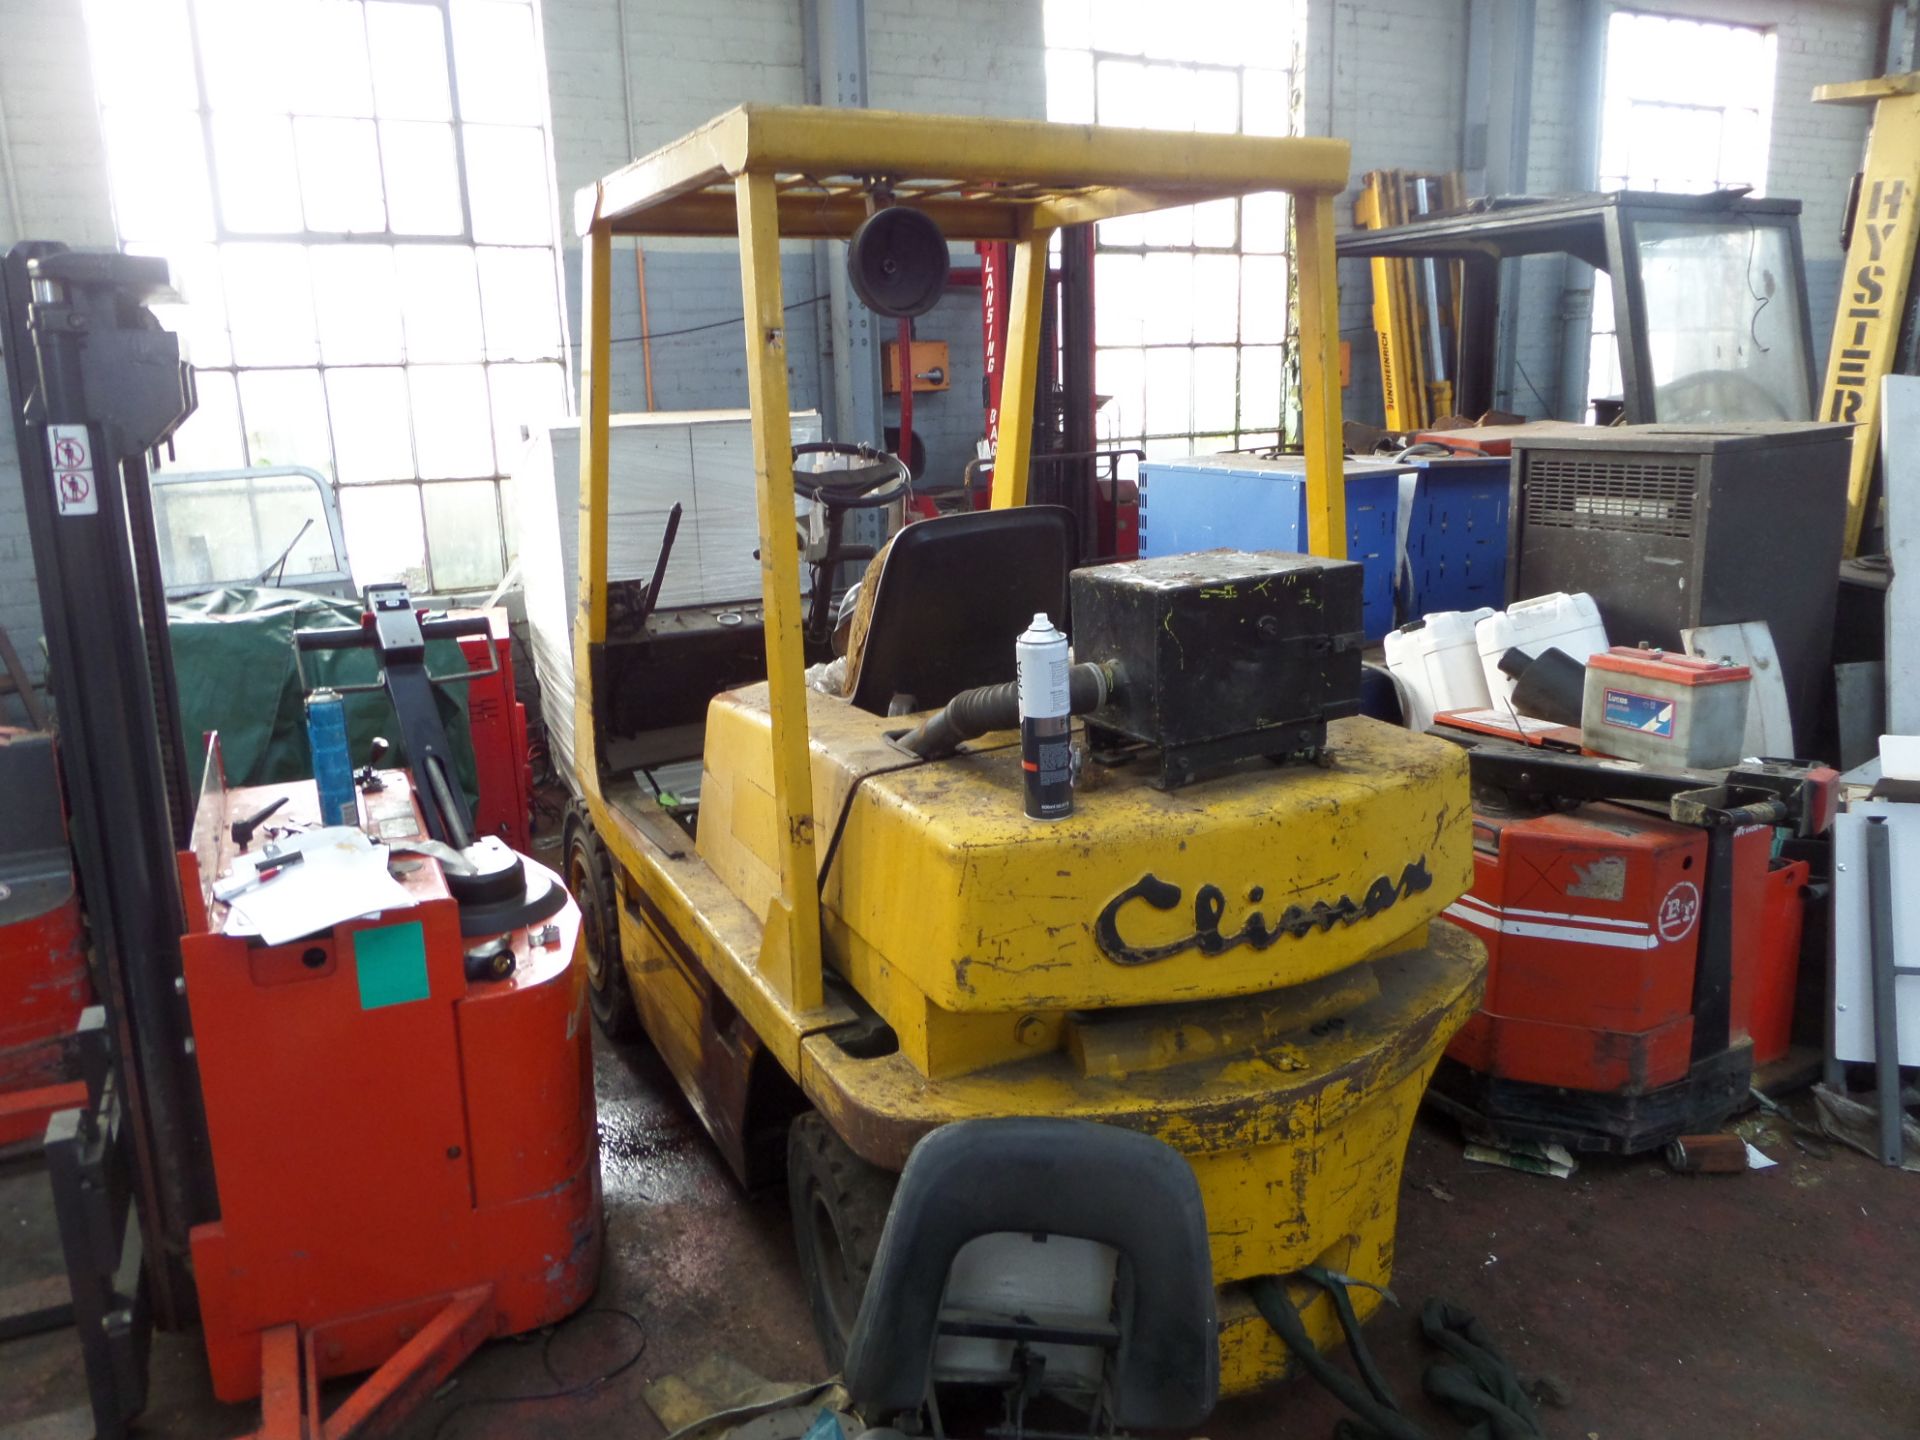 CLIMAX DAQ 2.5 Plant Diesel - VIN: 6110027 - Year: . - 0 Hours - Forklift - Image 4 of 7